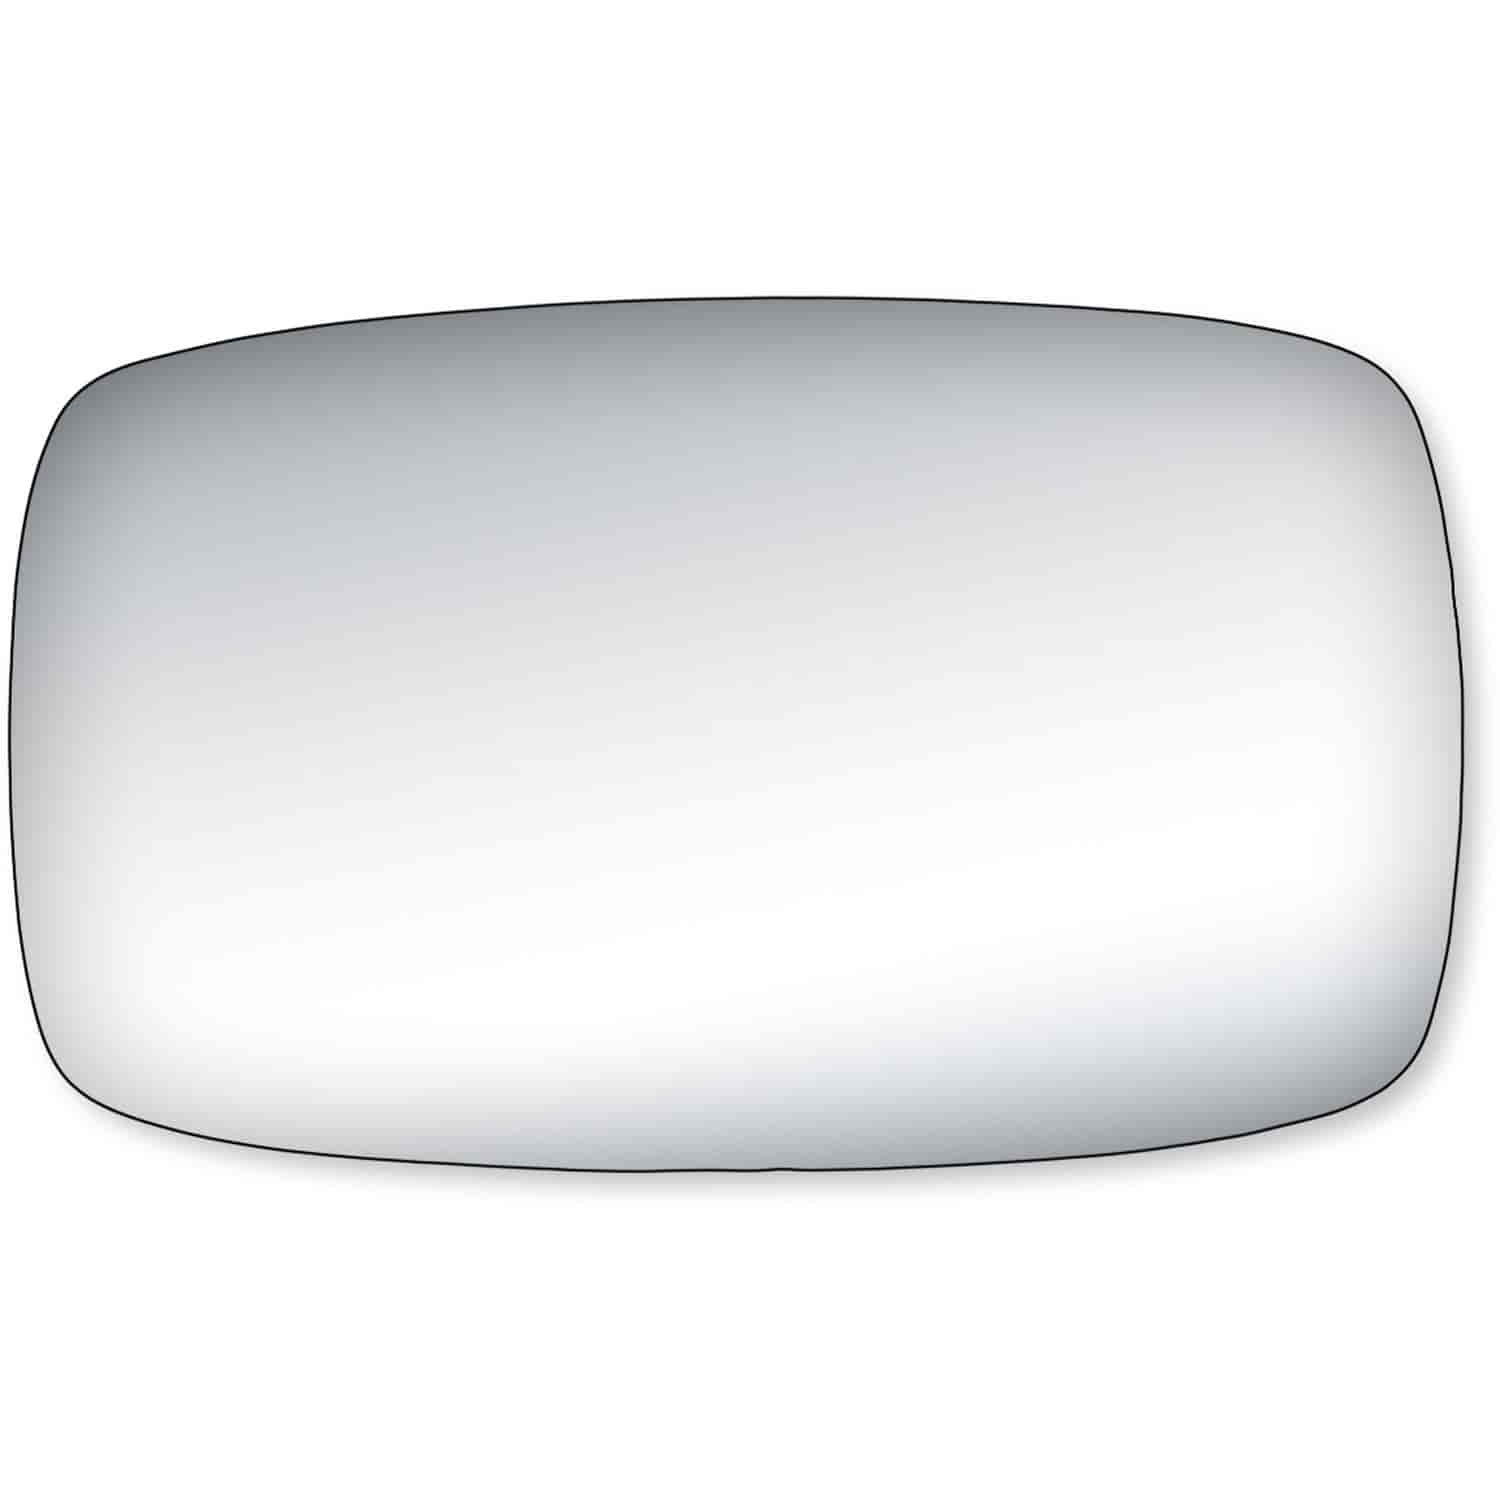 Replacement Glass for 95-00 Contour; 95-00 Mystique the glass measures 3 1/2 tall by 6 1/16 wide and